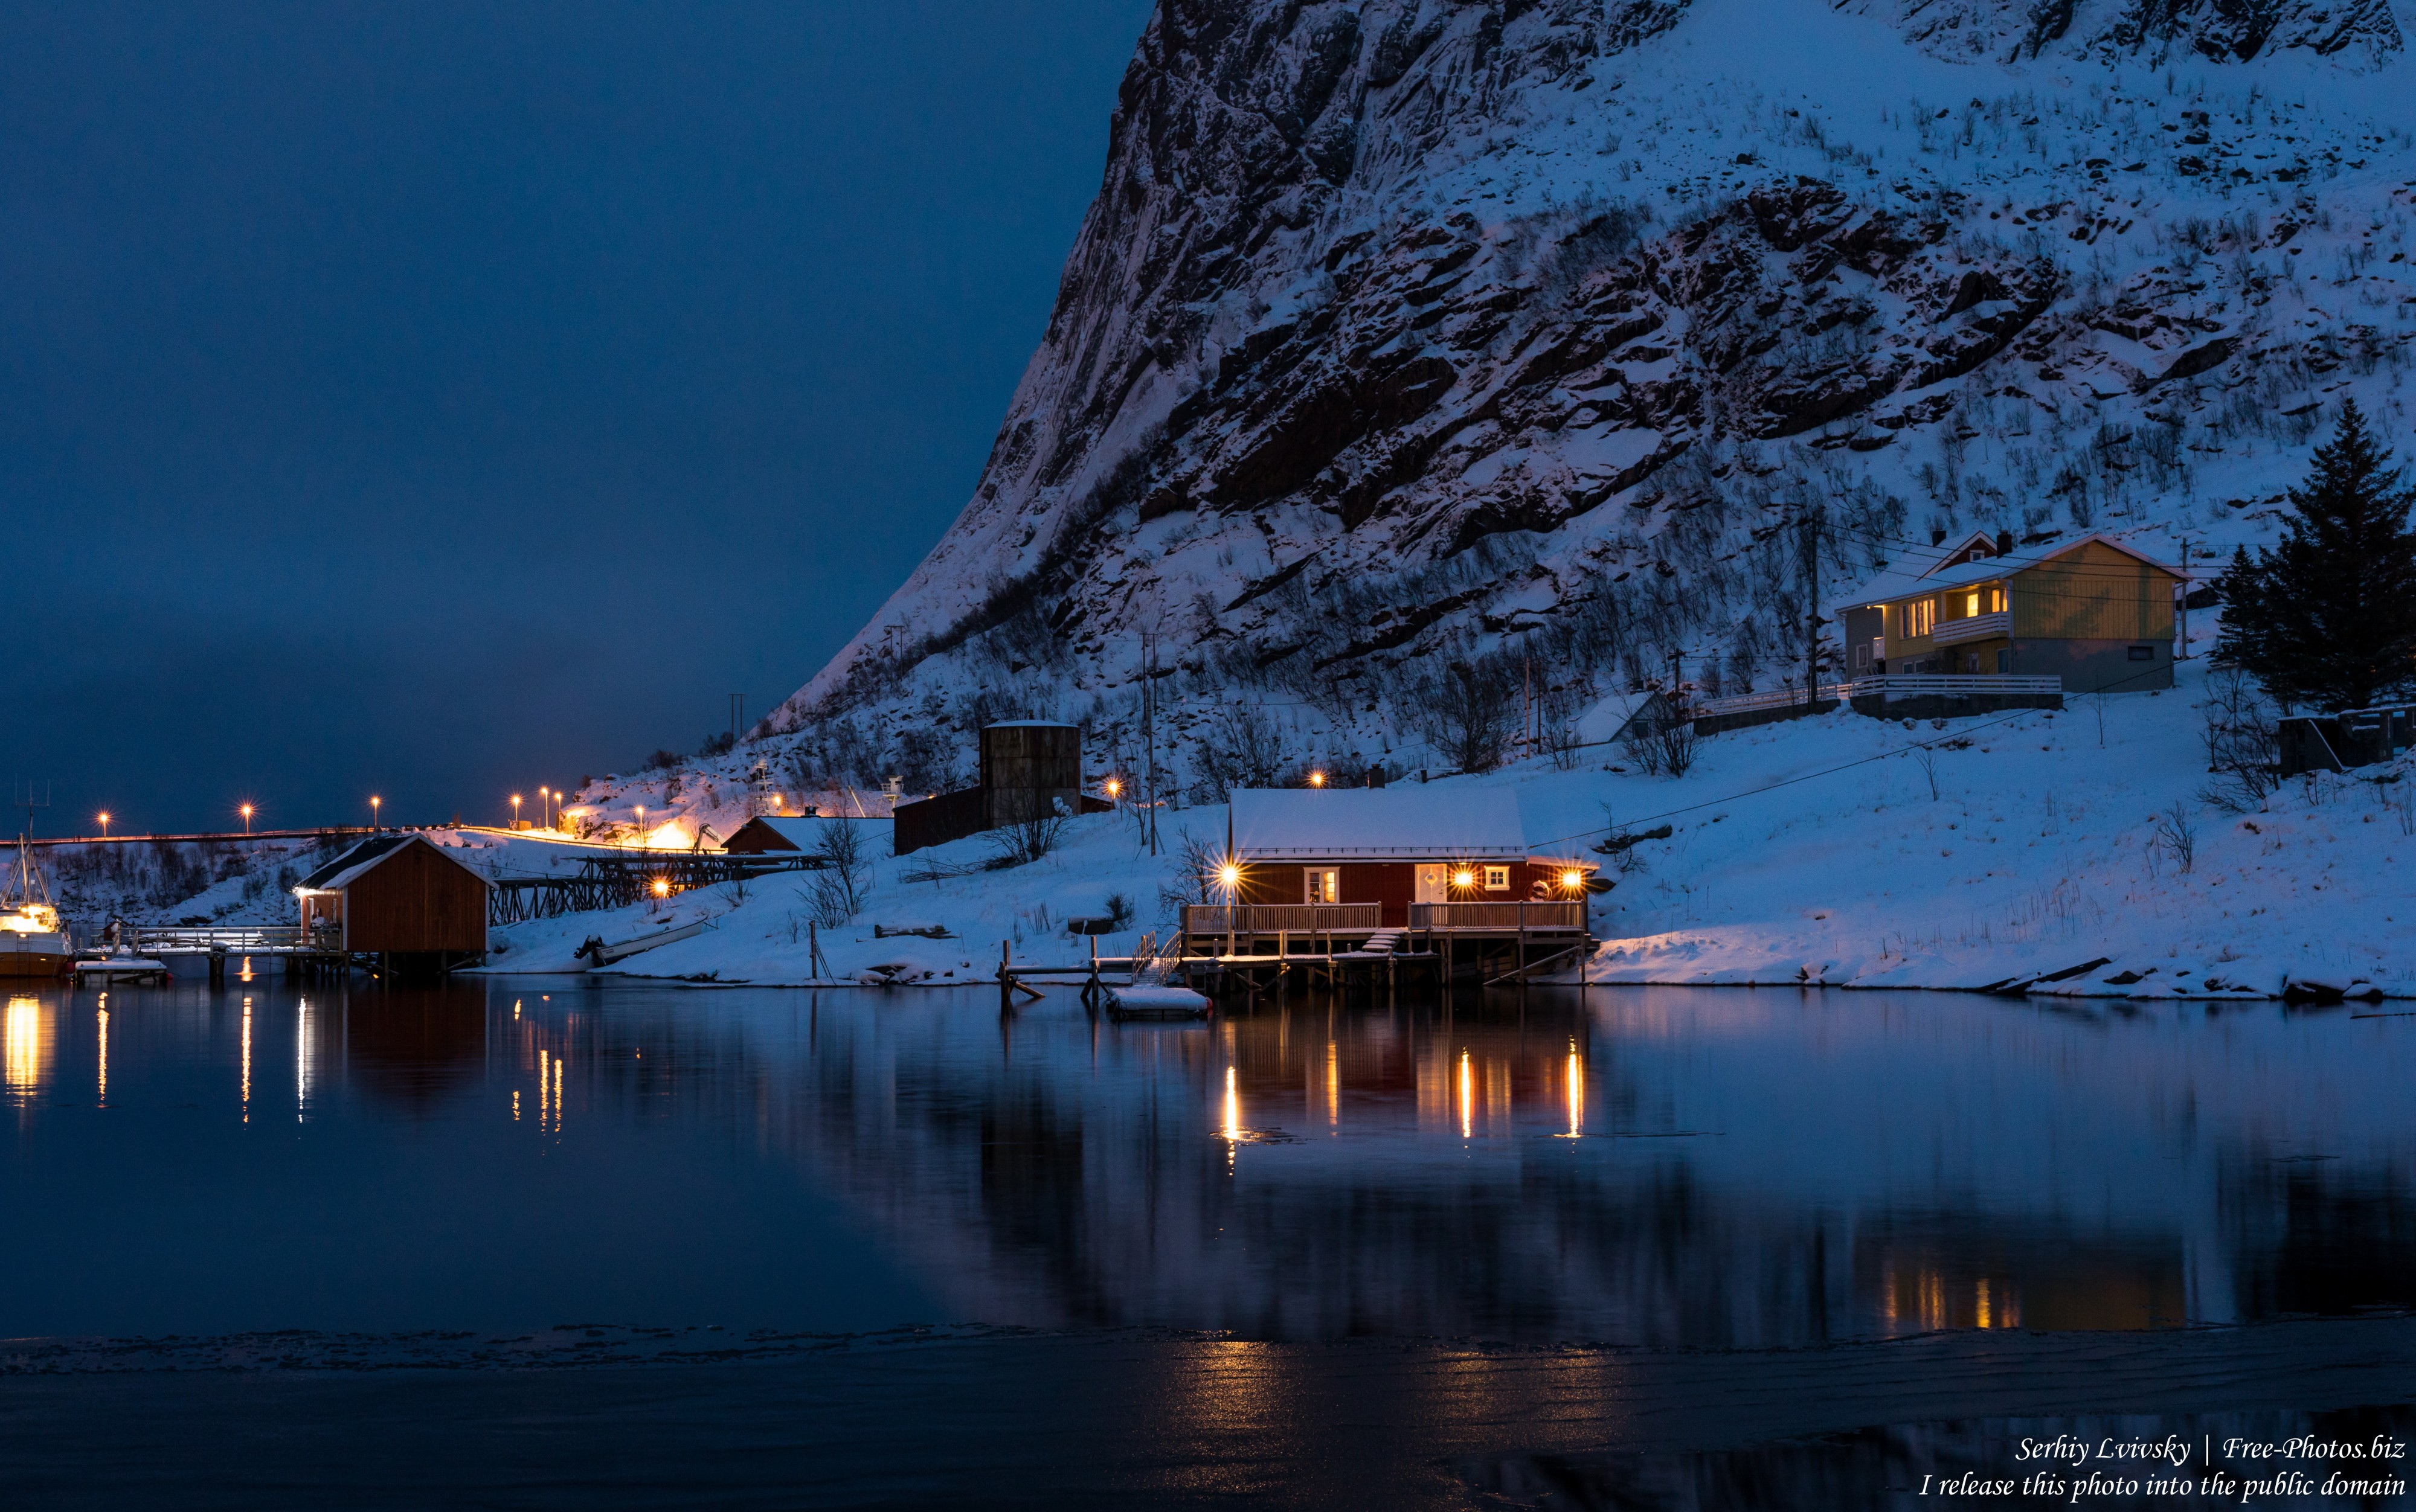 Reine and surroundings, Norway, in February 2020, by Serhiy Lvivsky, picture 14